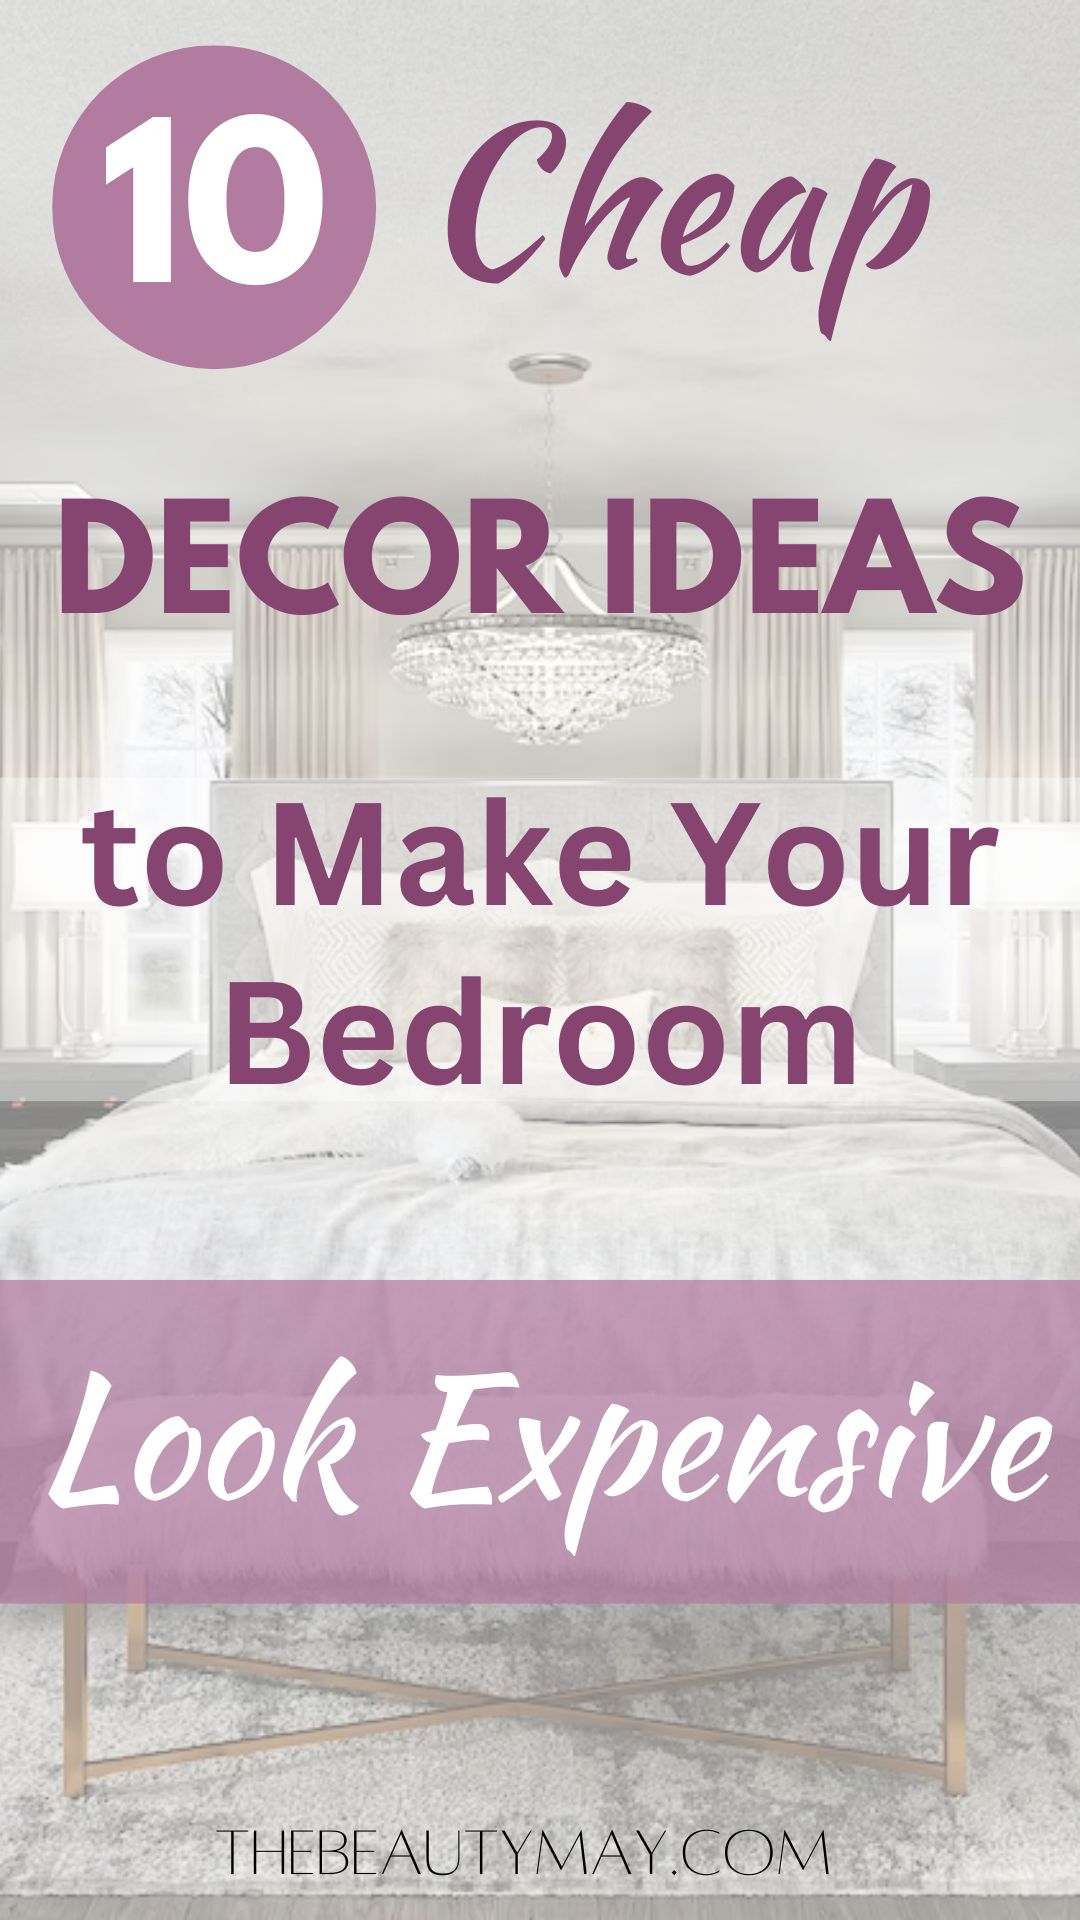 How to make your bedroom look expensive